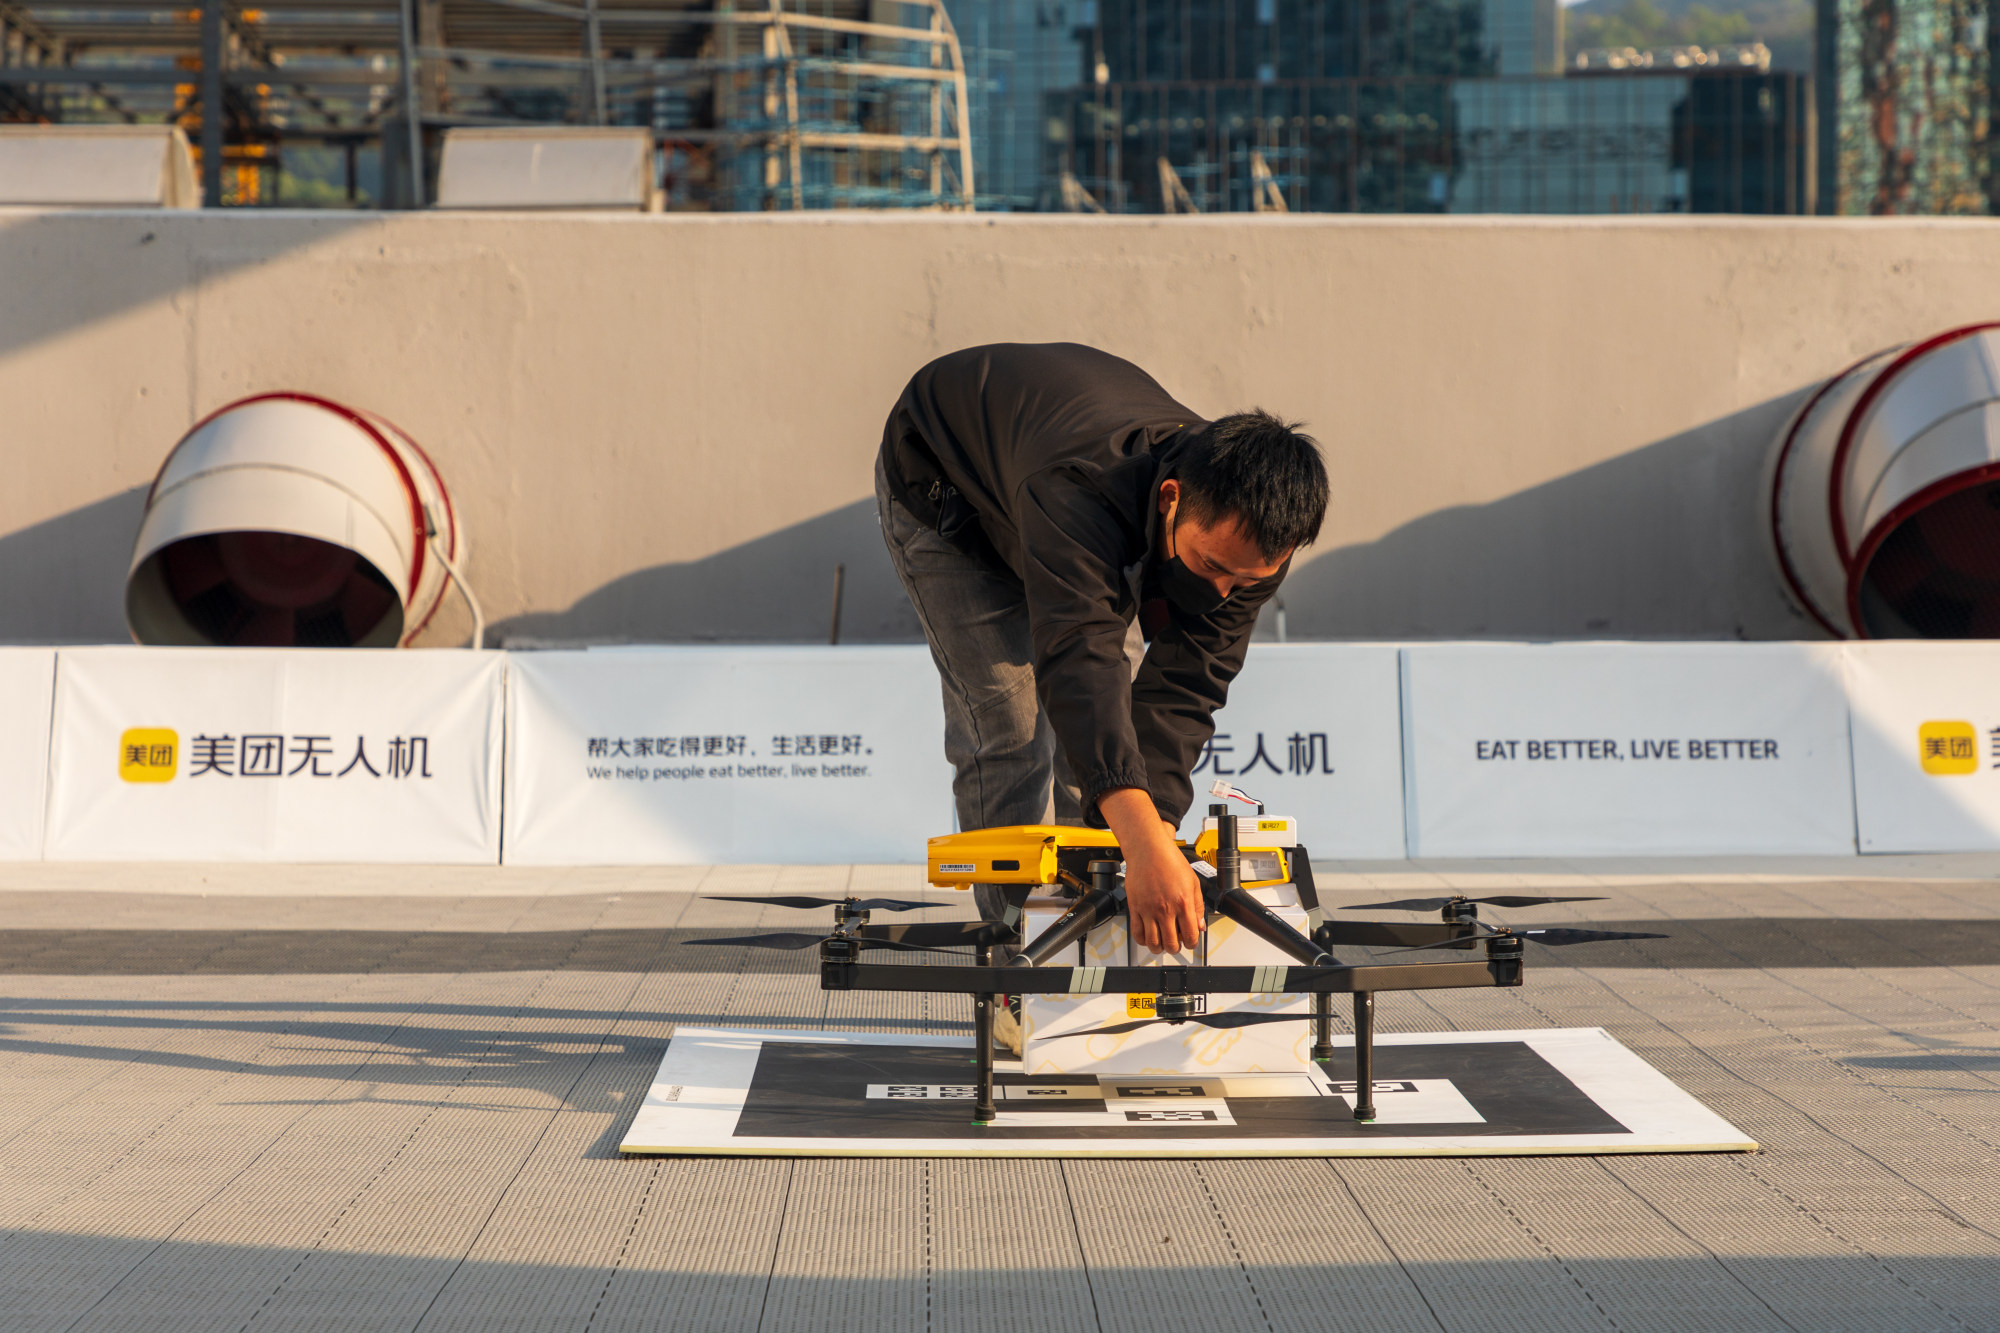 A Meituan employee fixes a delivery box to a drone. Photo: Getty Images